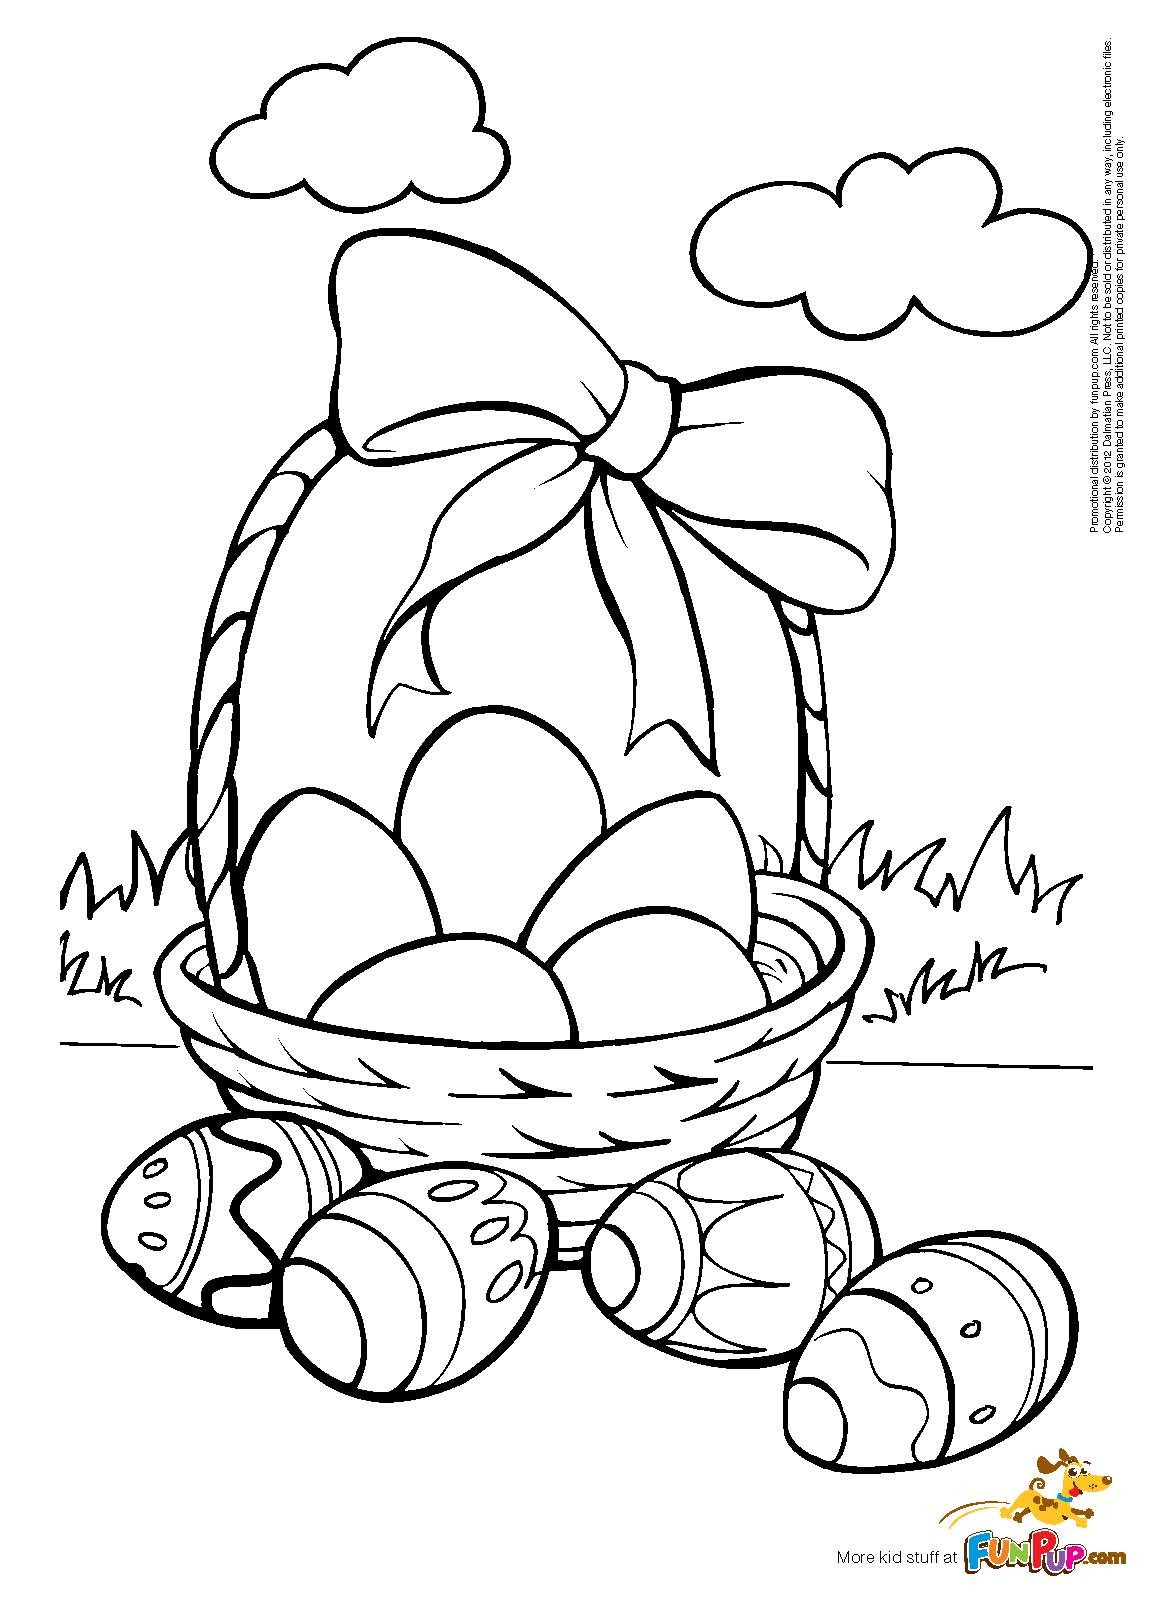 March coloring pages to download and print for free